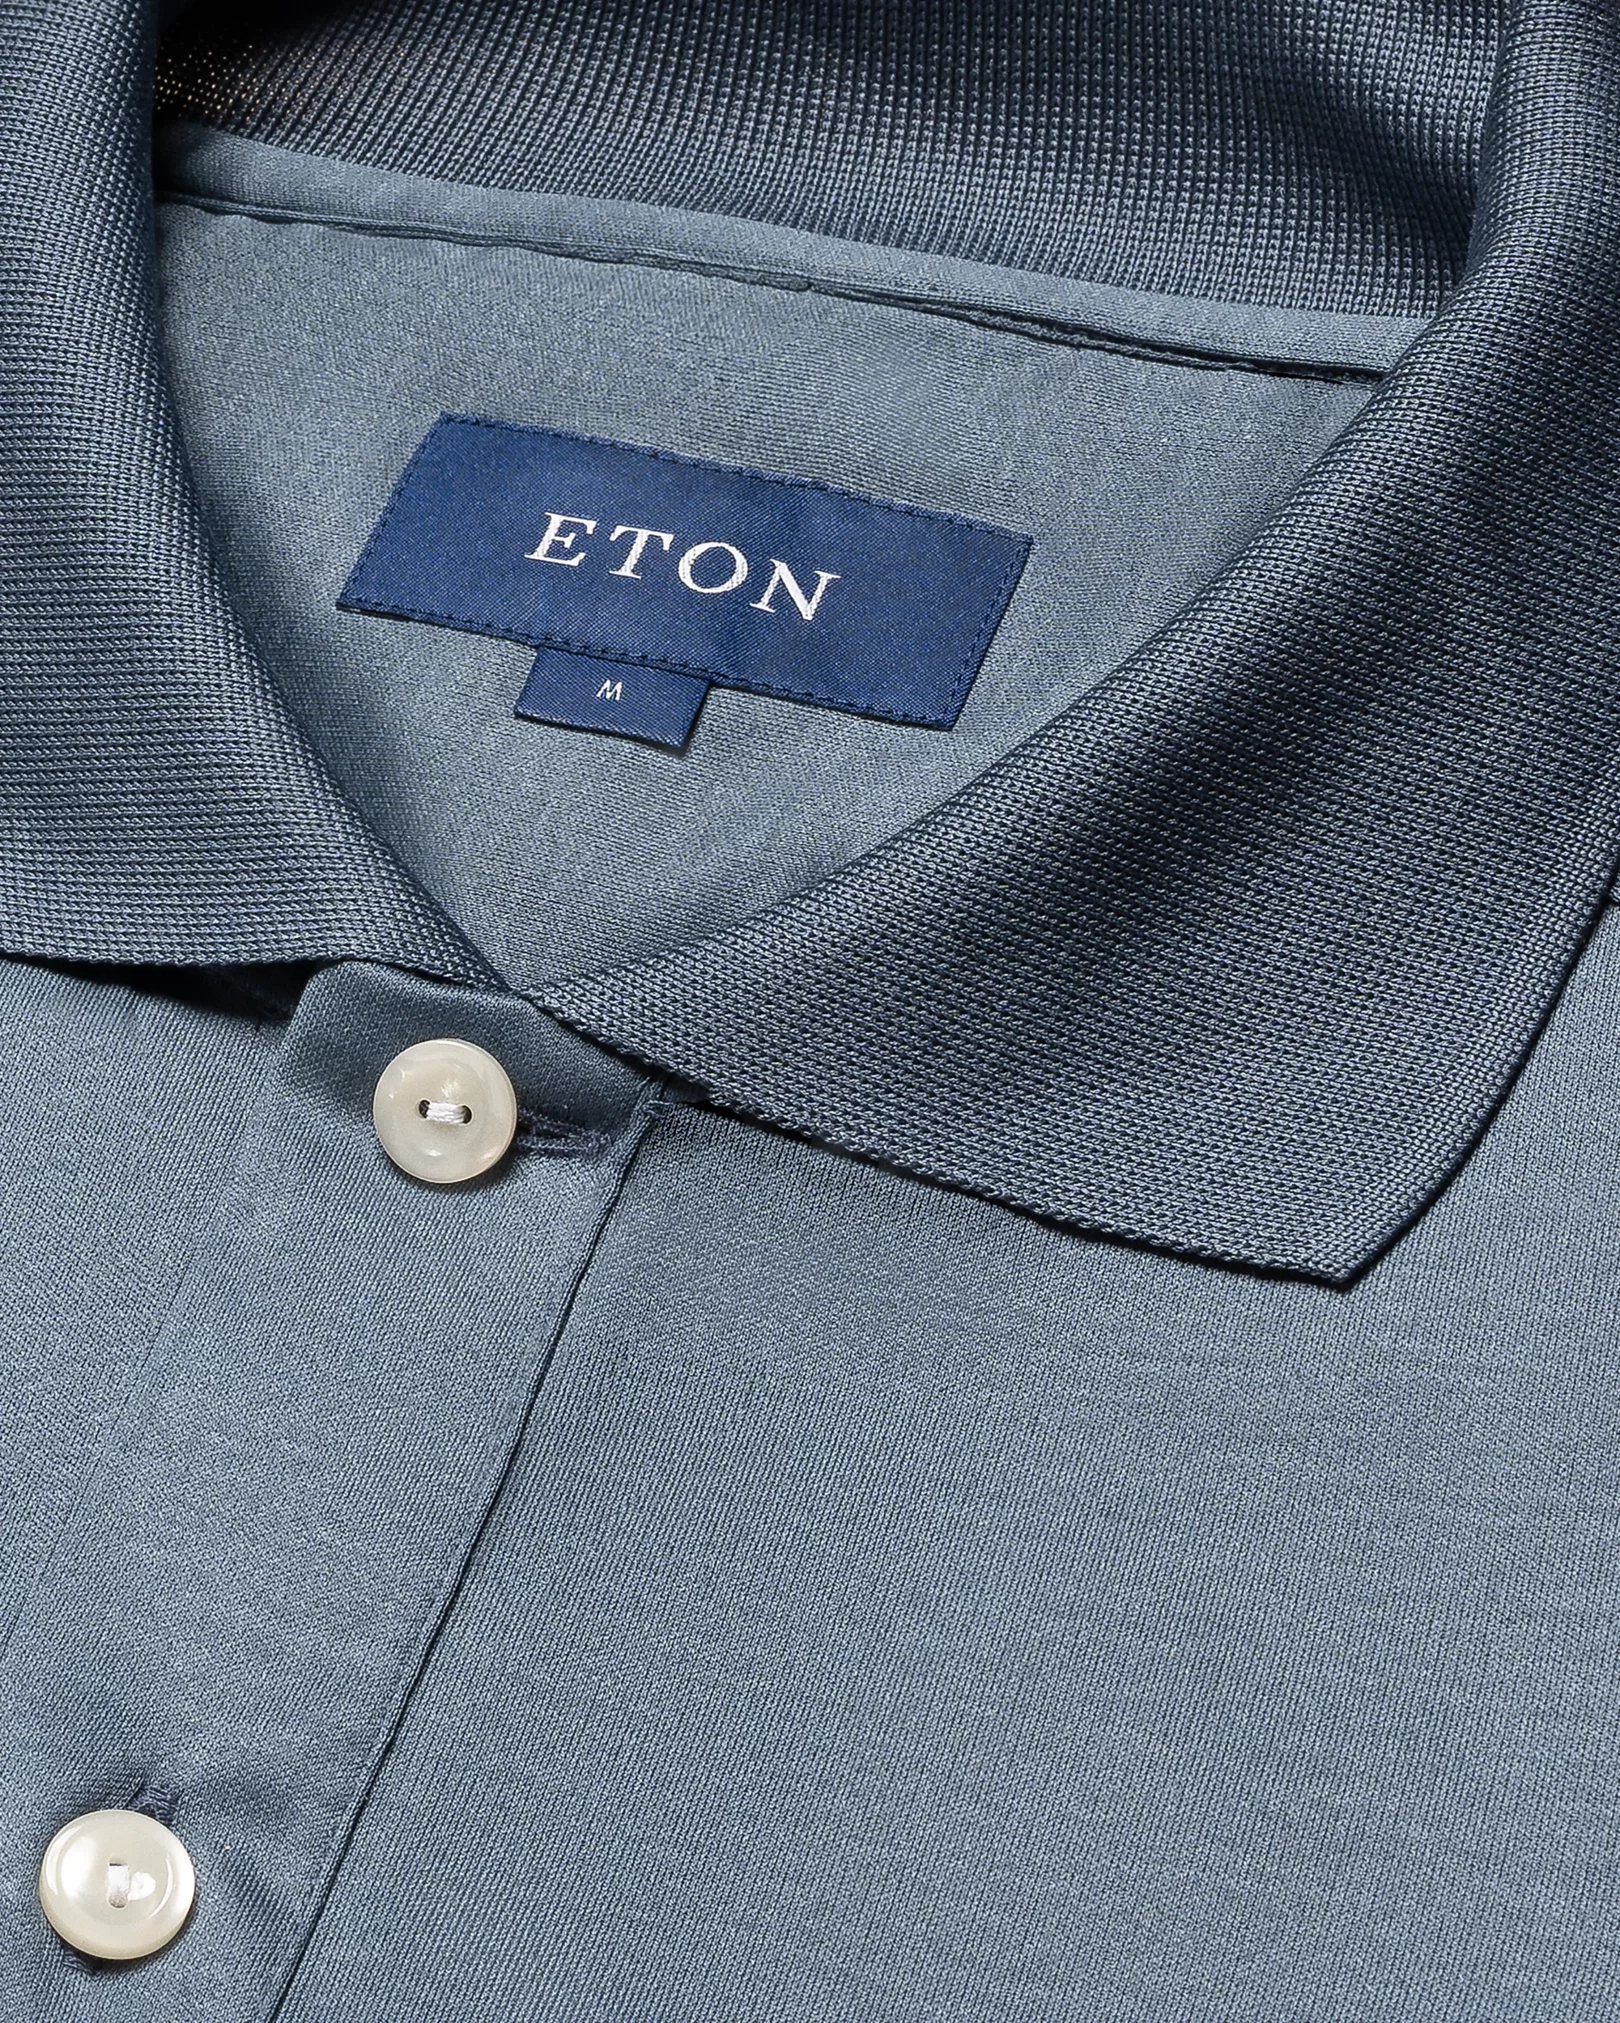 Eton - mid grey jersey knitted